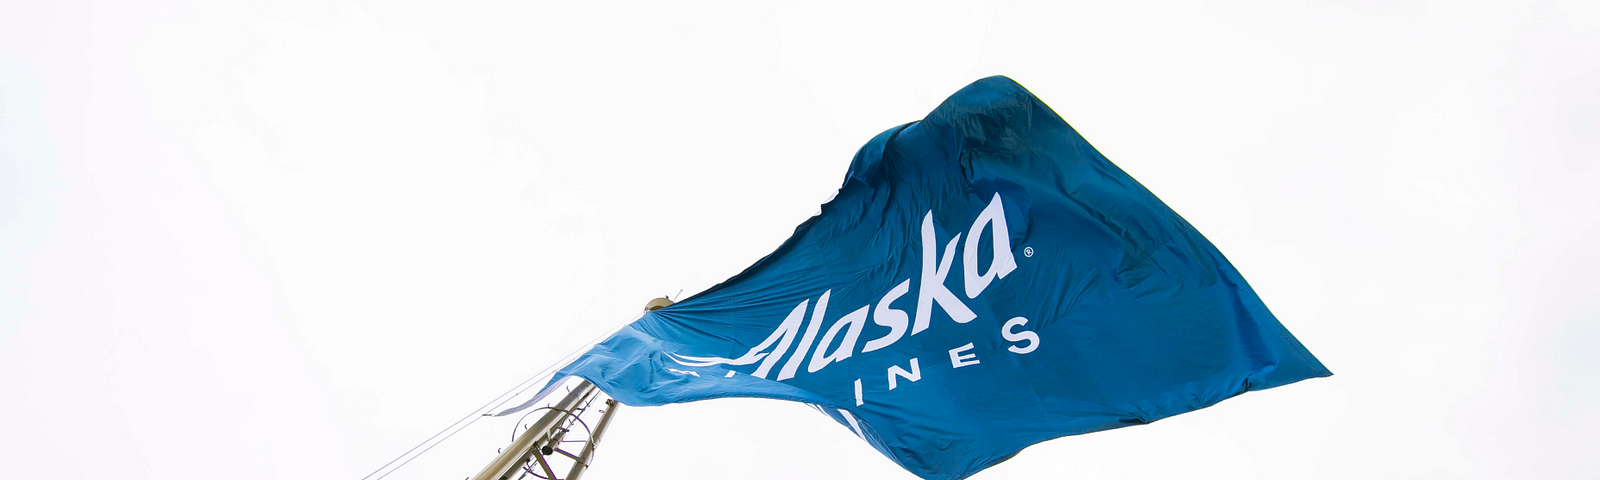 An Alaska Airlines flag waving on top of the space needle. Credit: Ingrid Barrentine